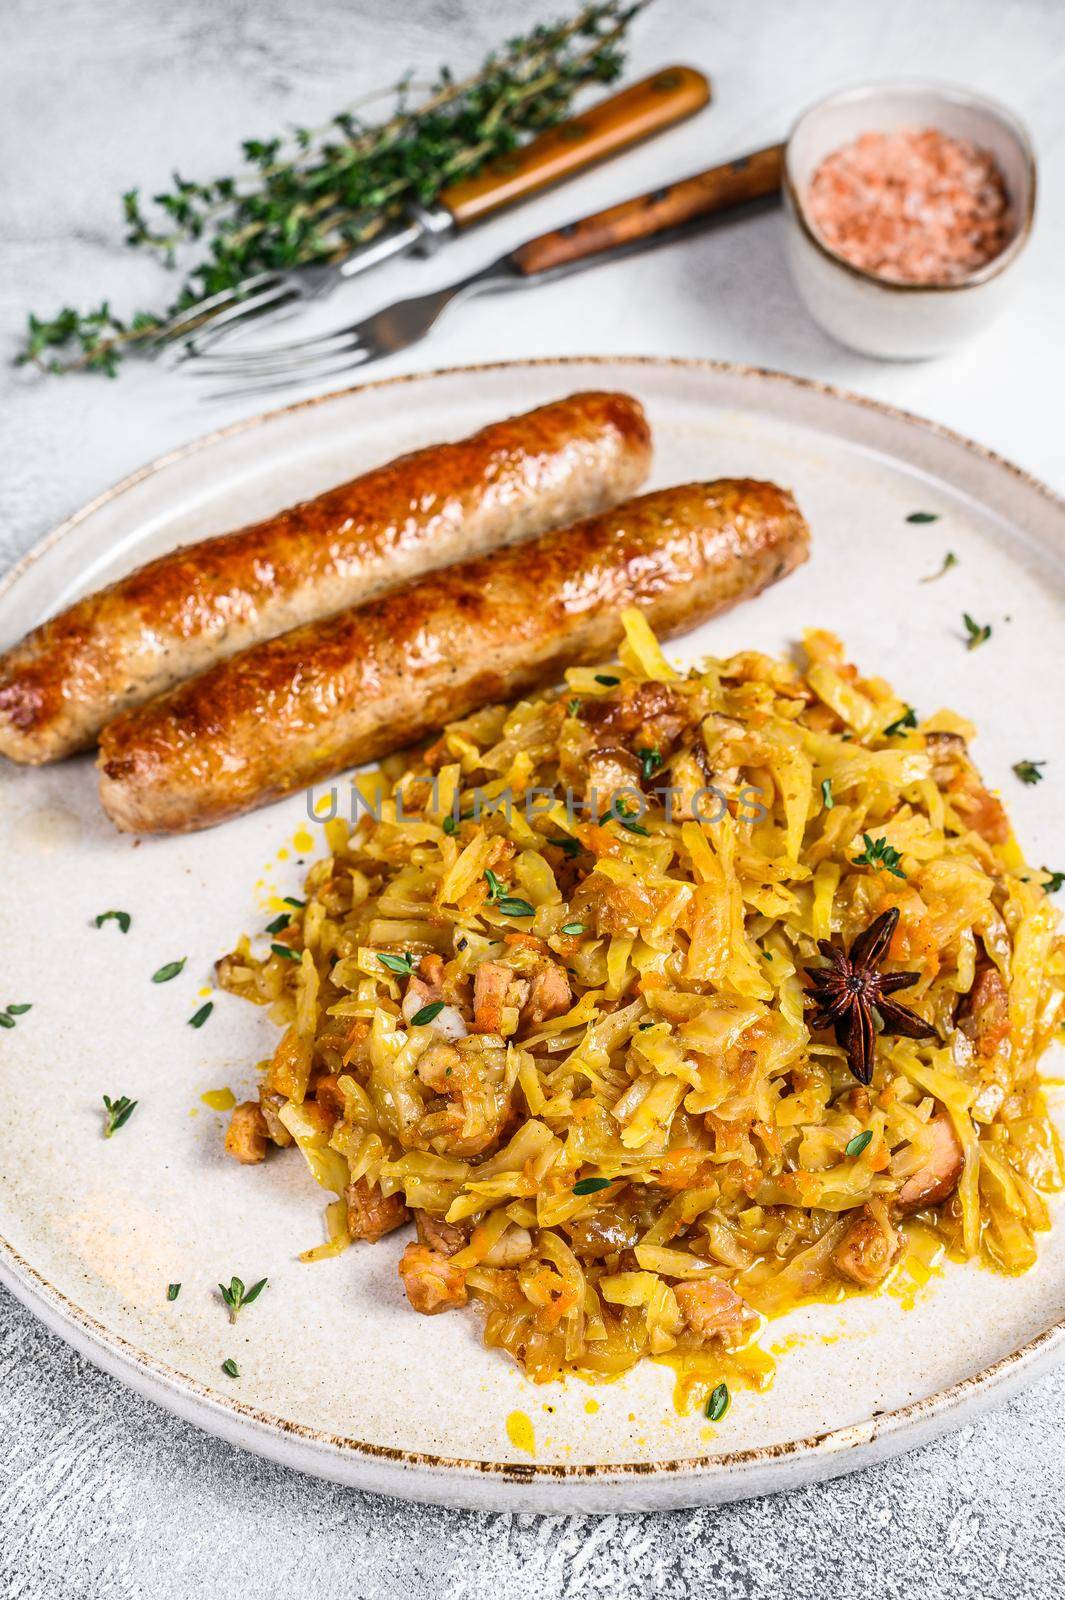 Stewed cabbage with mushrooms and meat sausages on a plate. White background. Top view.